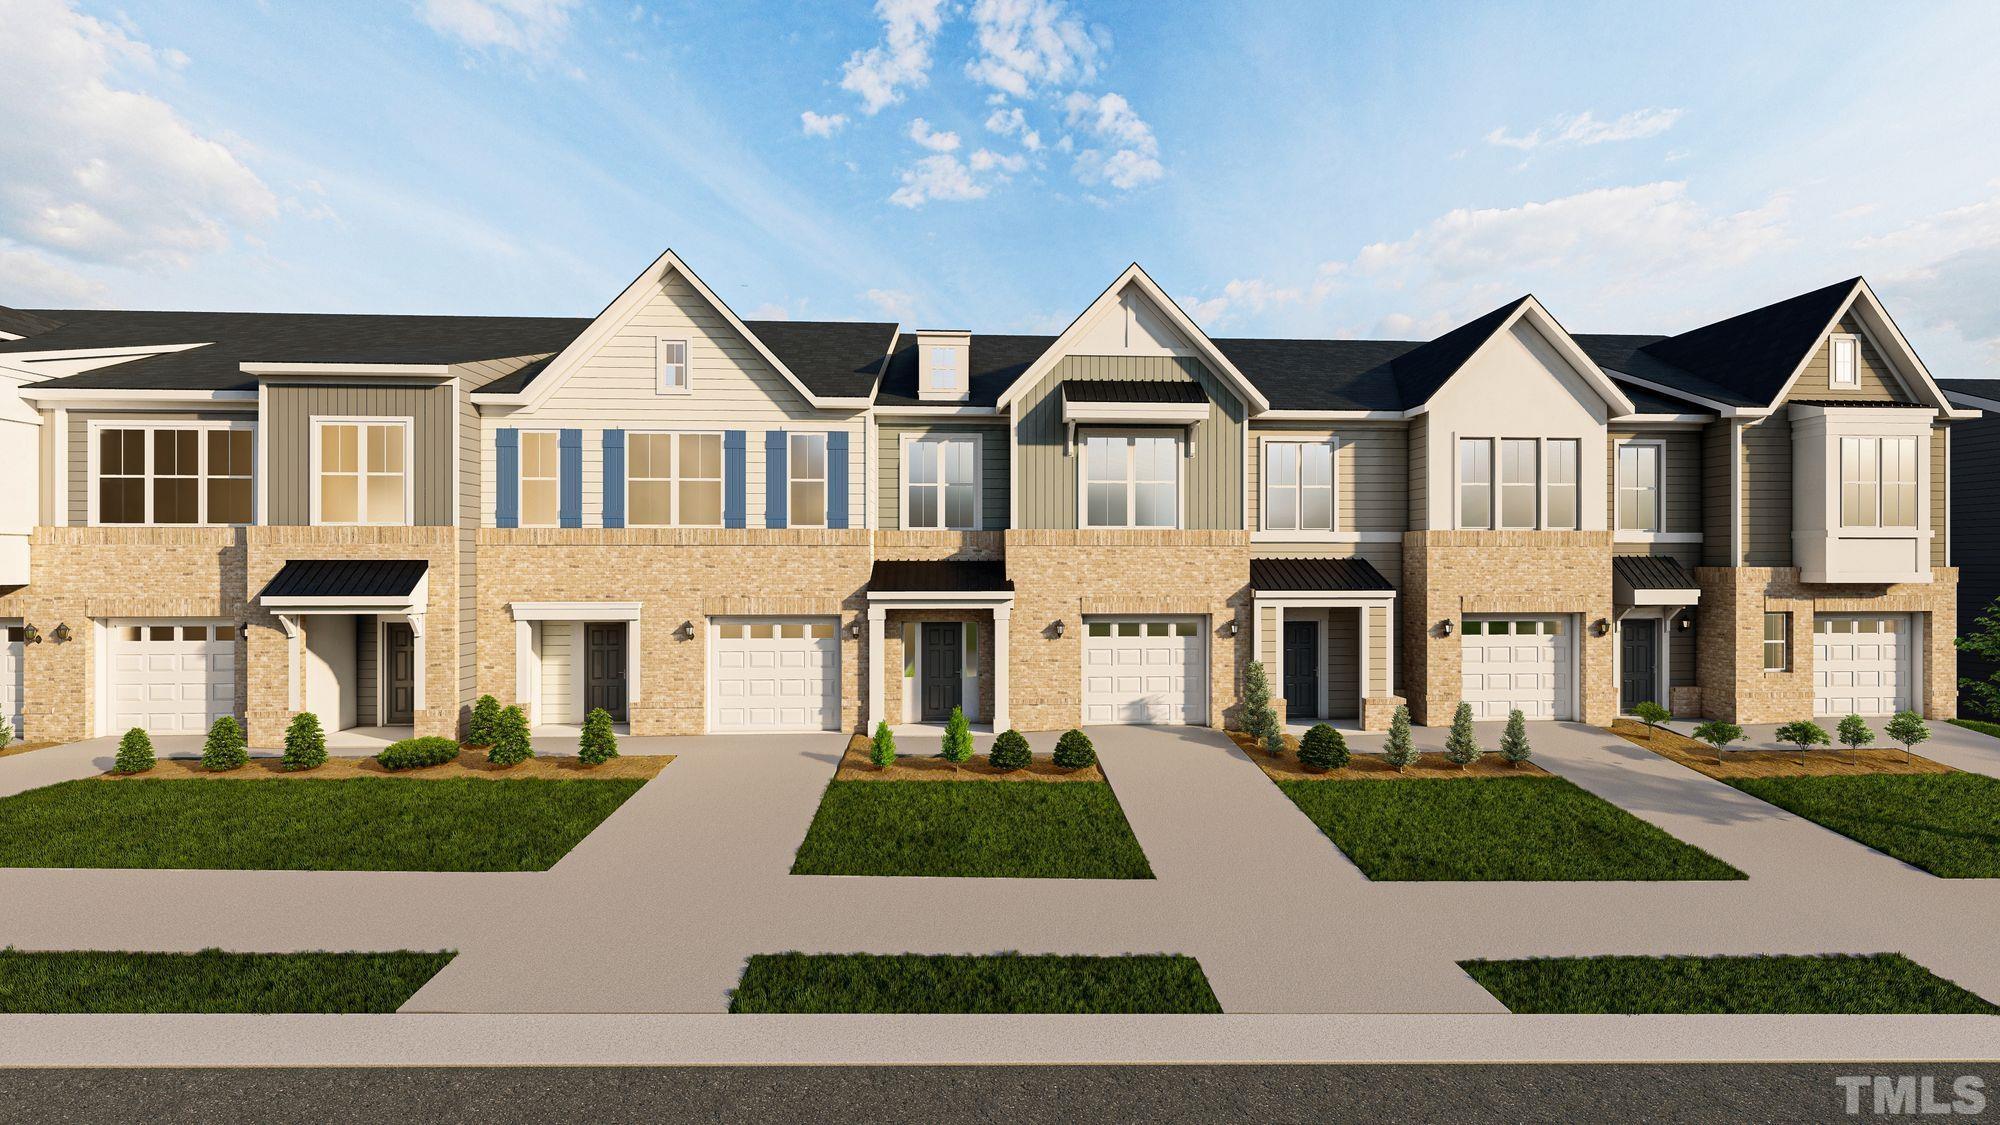 Photos and renderings are representative of selected features and building elevations. Actual color selection and location of specific homesite may vary. Please speak with a New Home Advisor for more information.